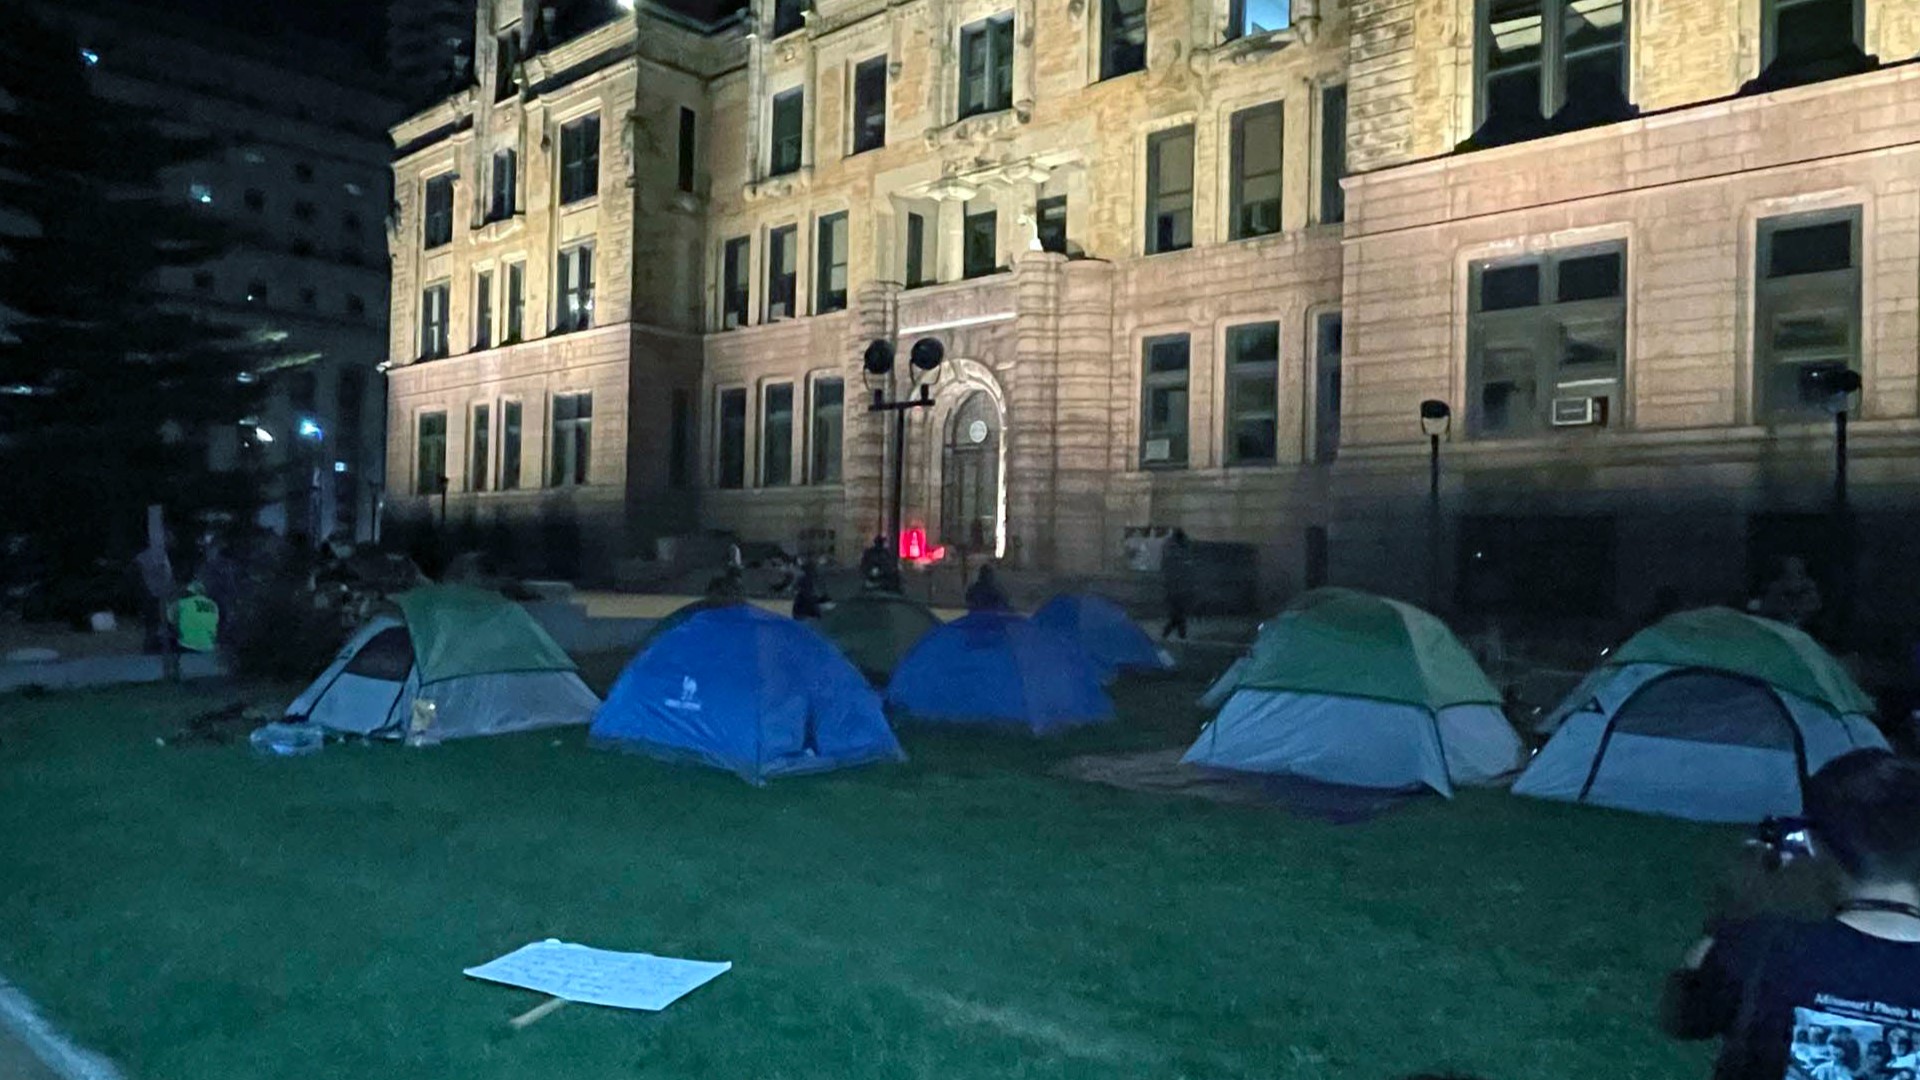 Dozens of people living in a makeshift encampment on the lawn of St. Louis' City Hall were forced to move Monday night.